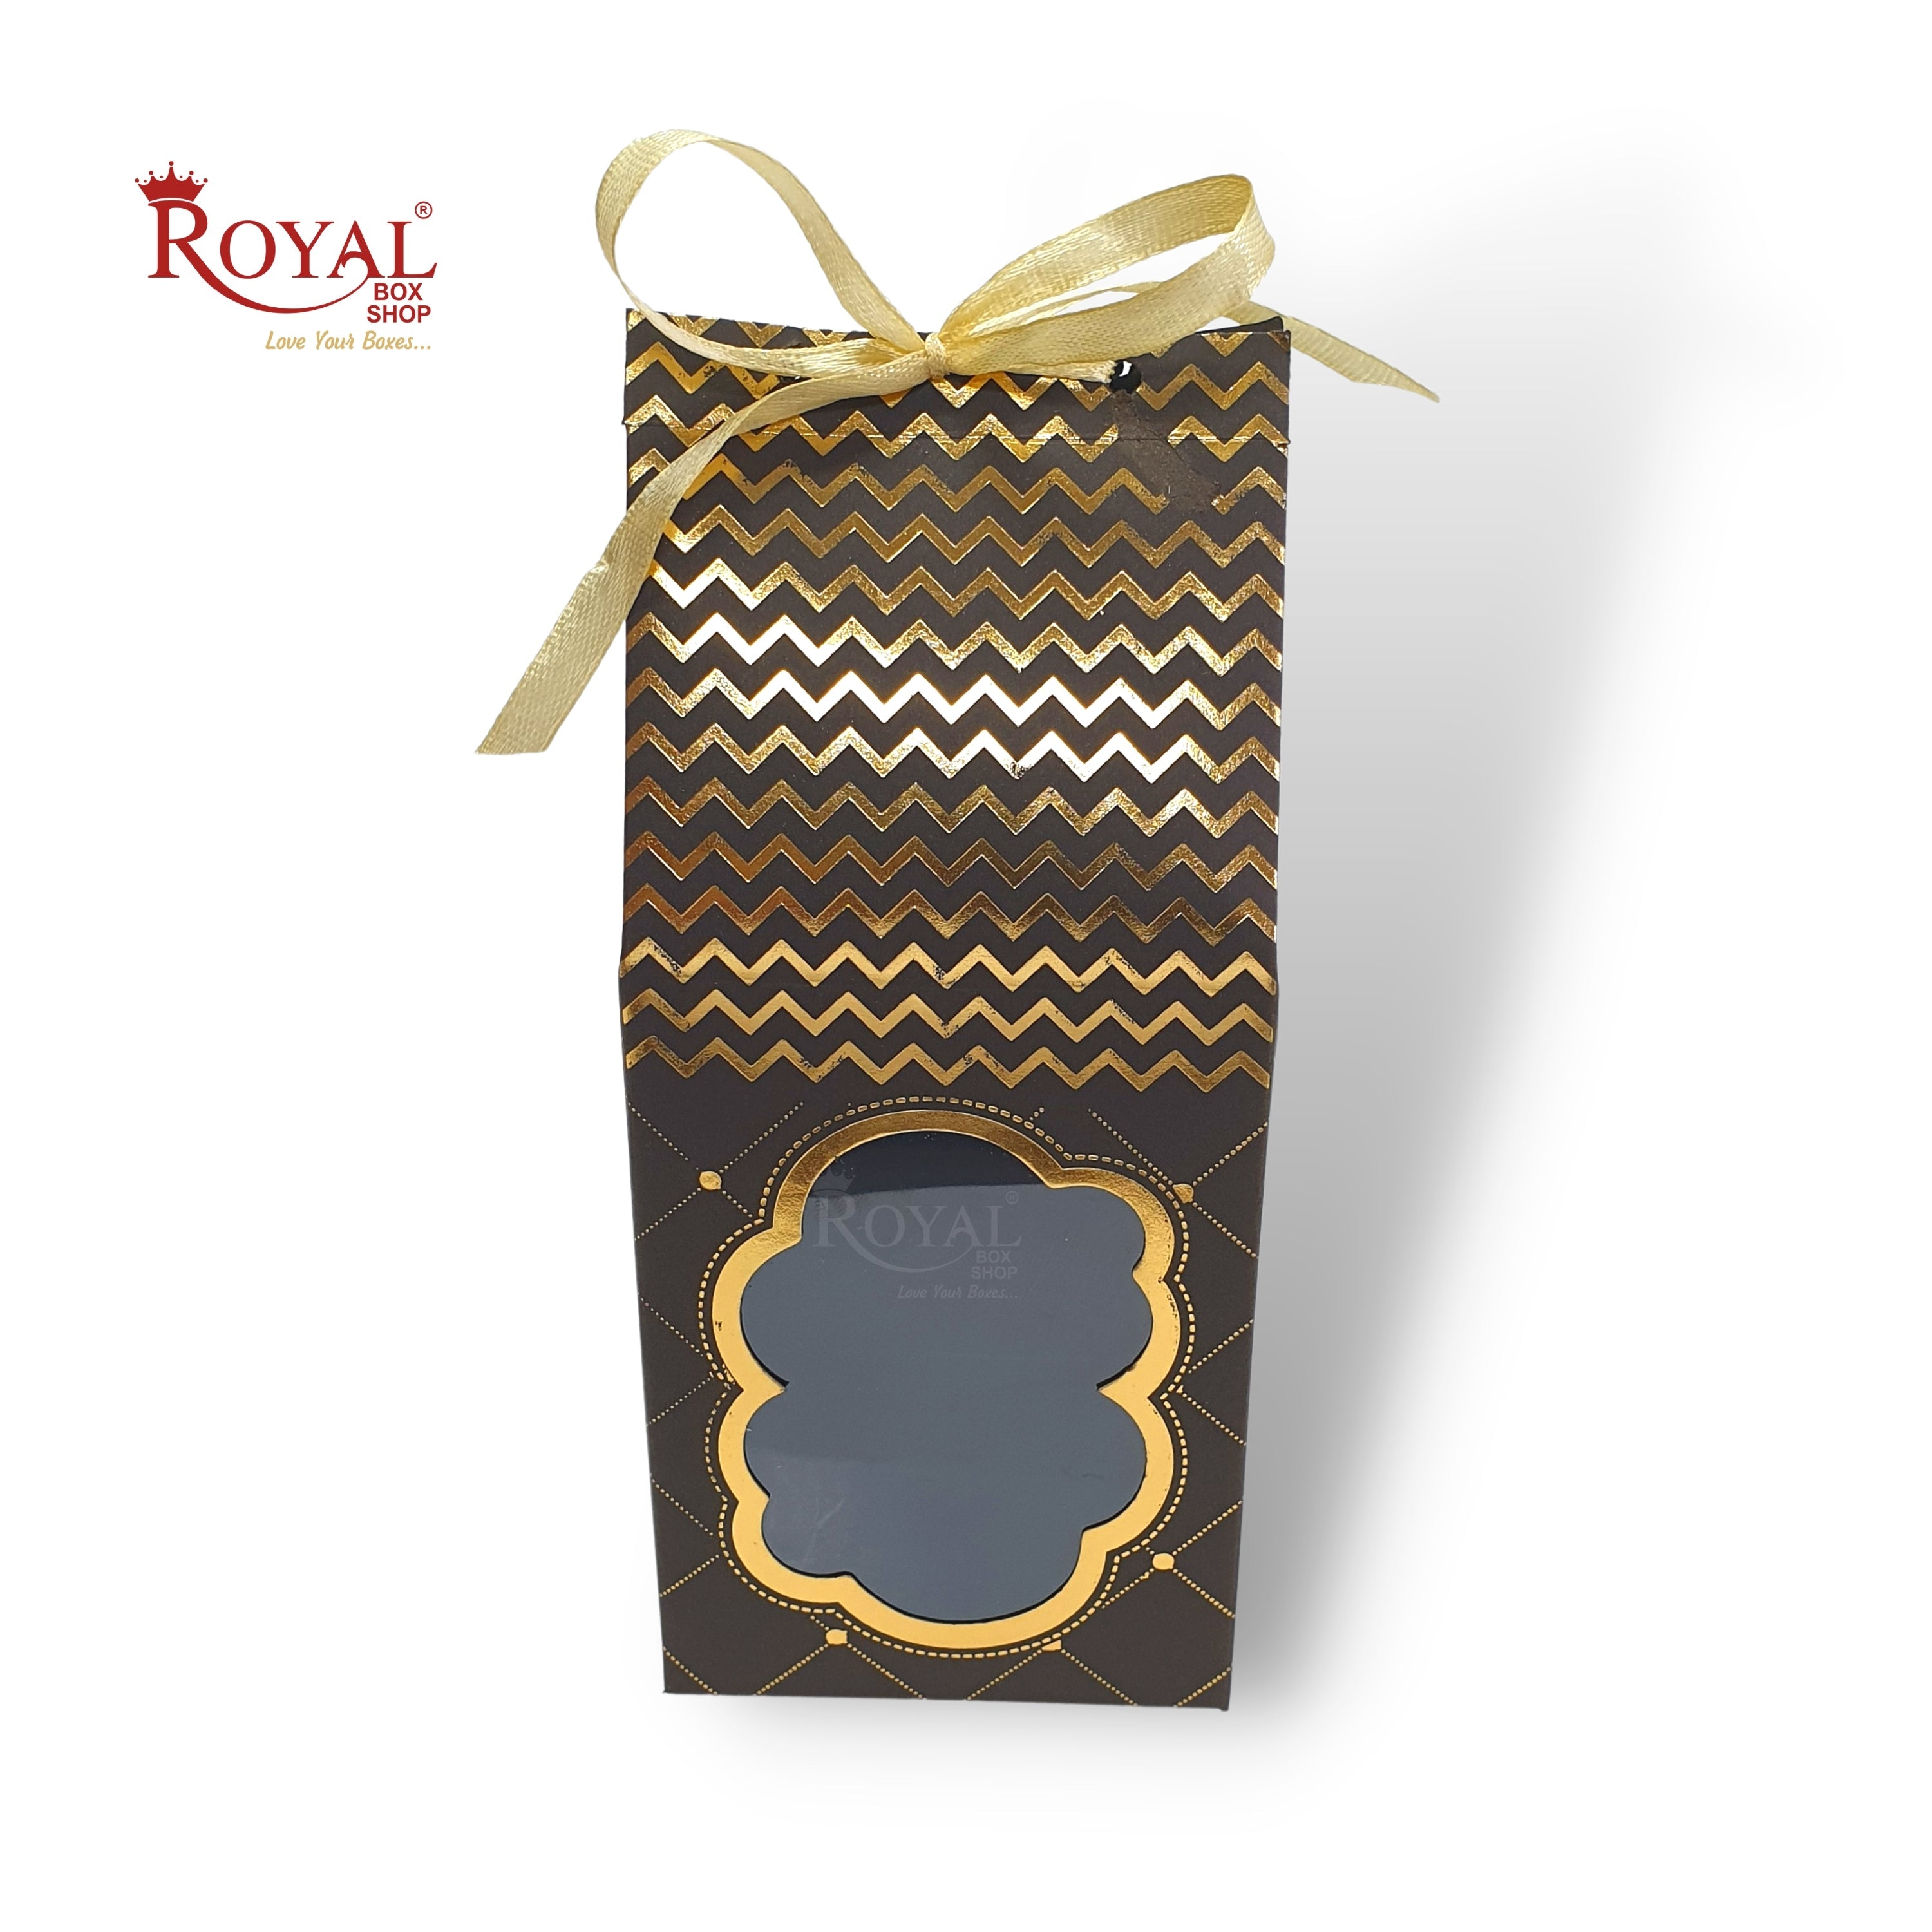 Premium Gift Box with Window I Brown Gold Leafing Print I 4 5x3x3 inches I For Return Favor Gift Baby Shower Gifts Room Hampers Candy Box Birthday Return Gift R 4604